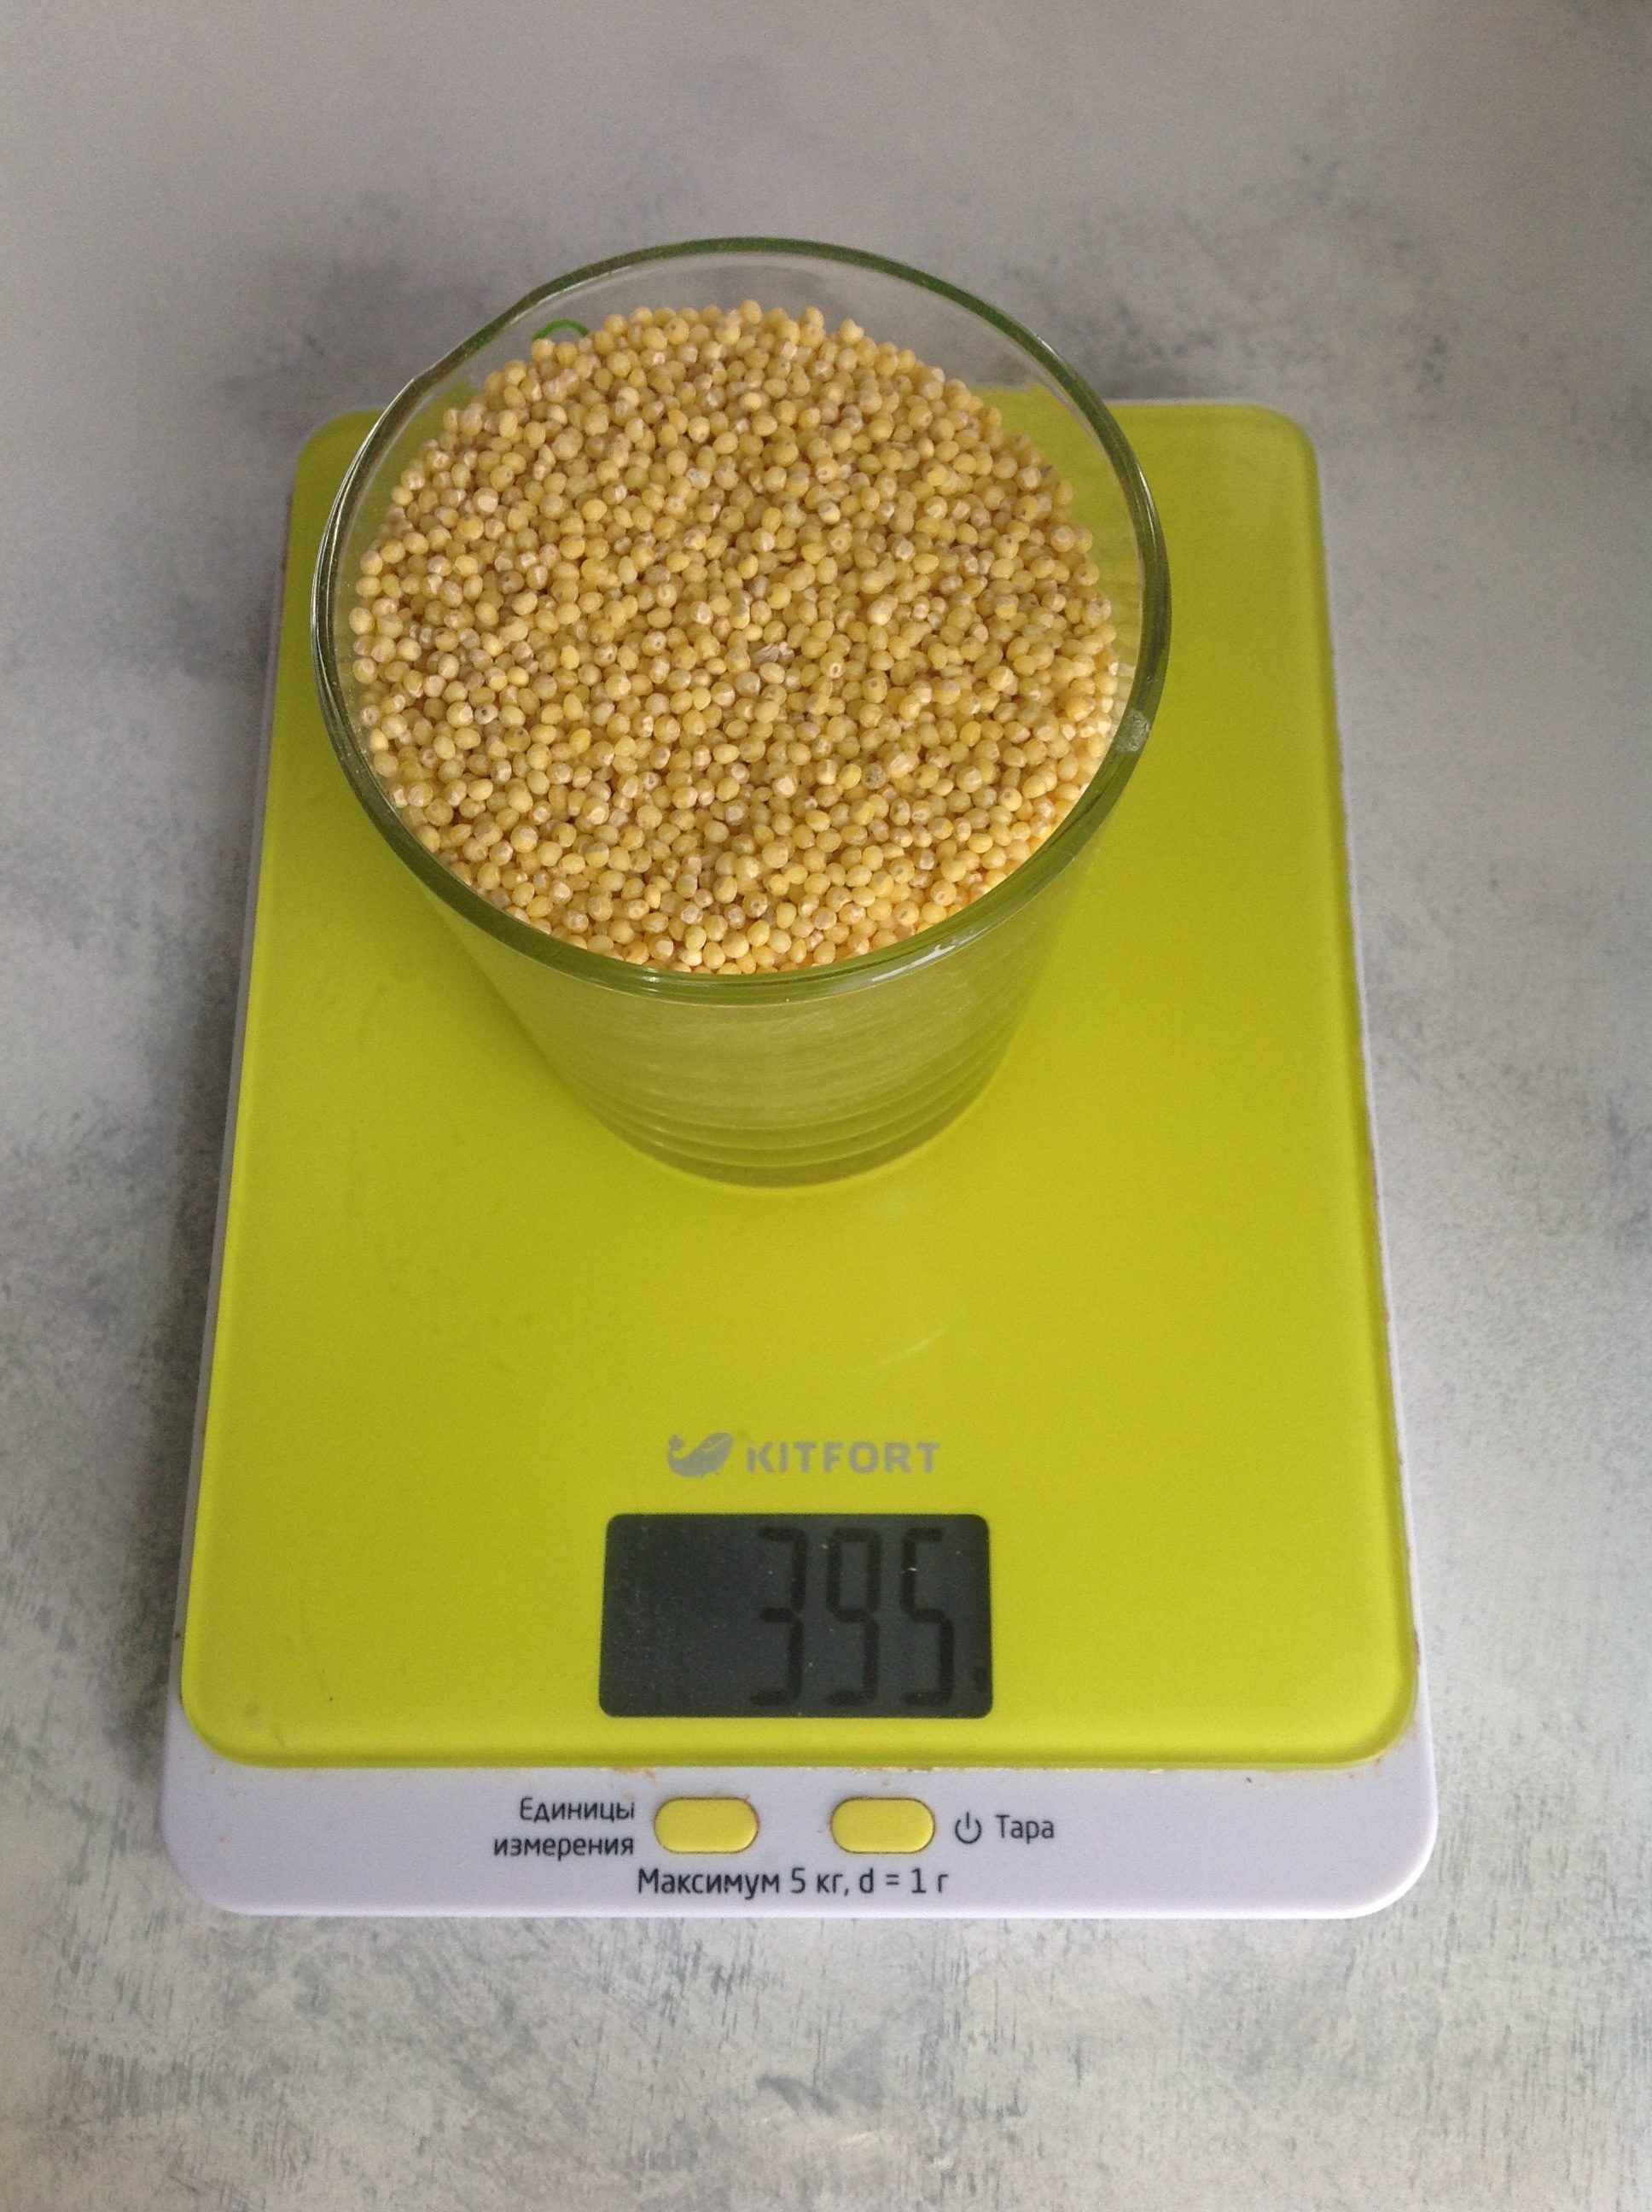 How much does dry millet weigh in a glass of 250 ml?